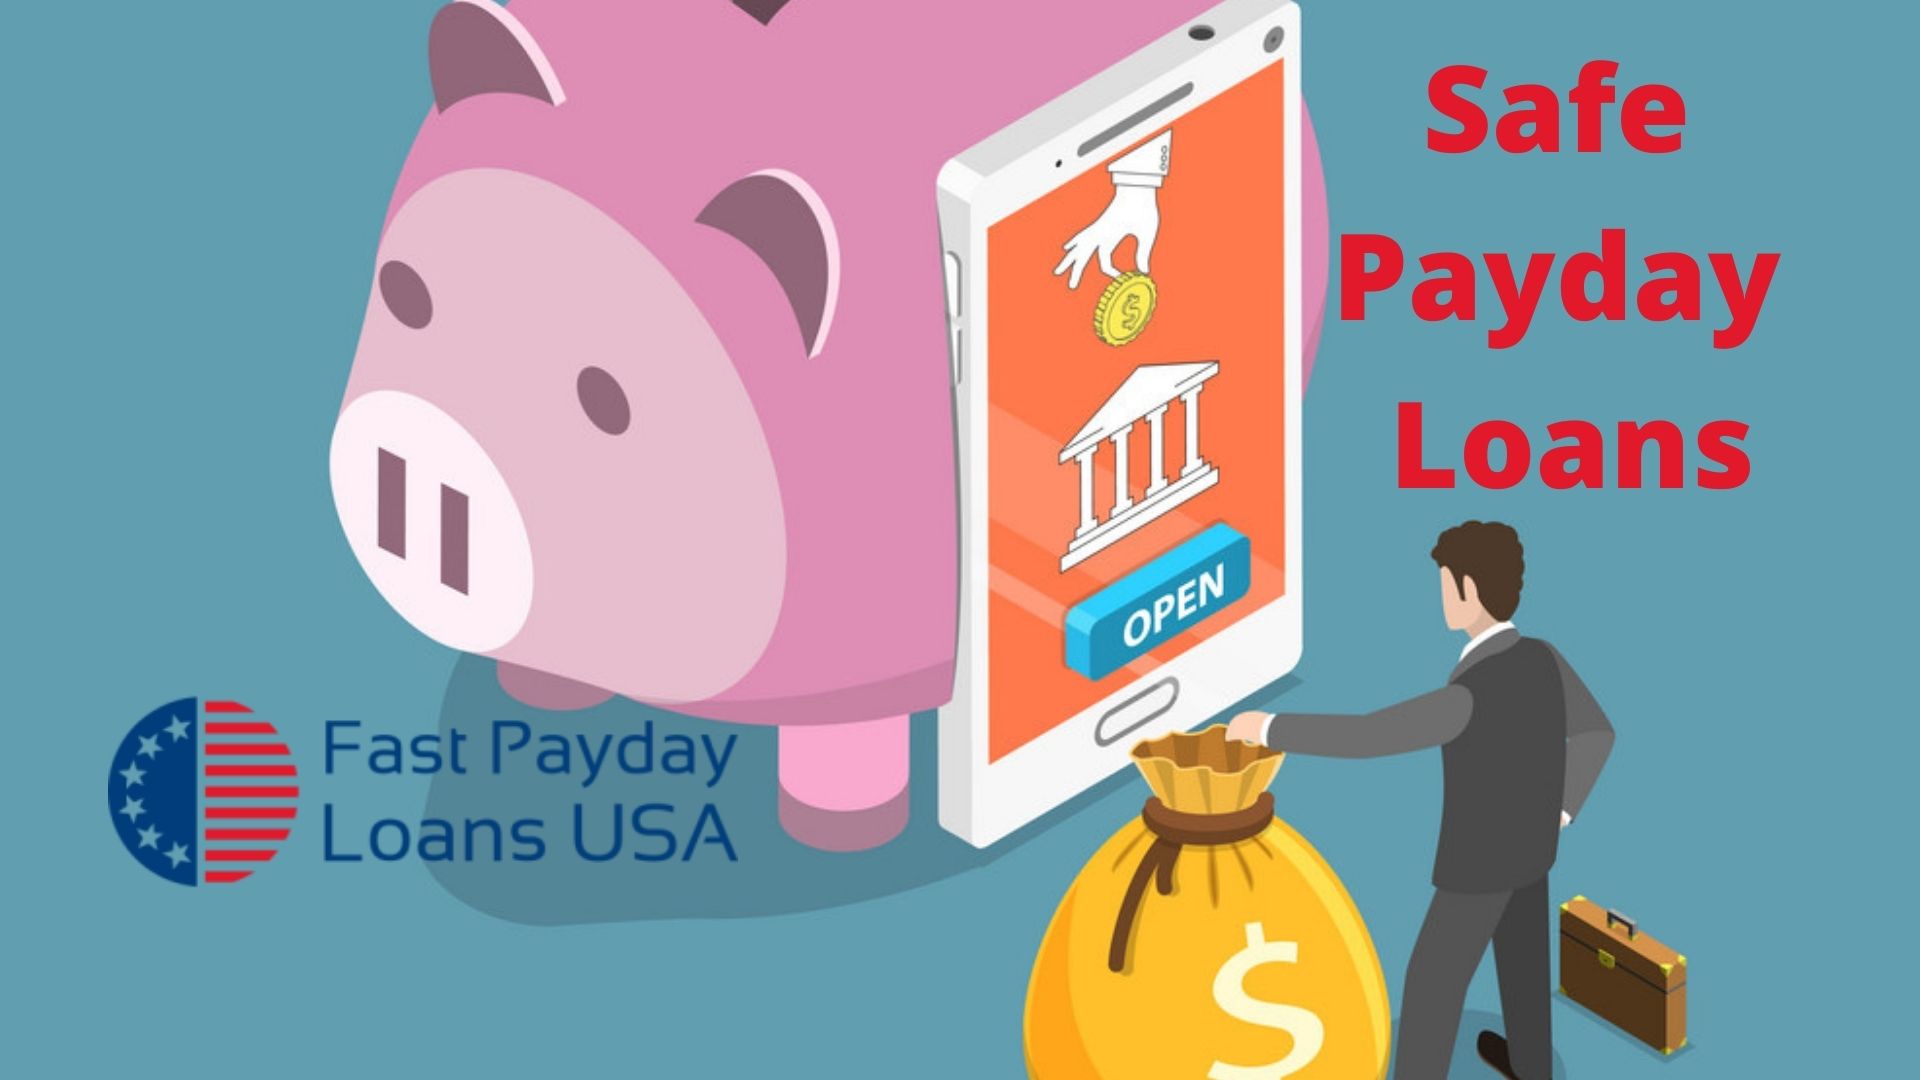 Safe Payday Loans